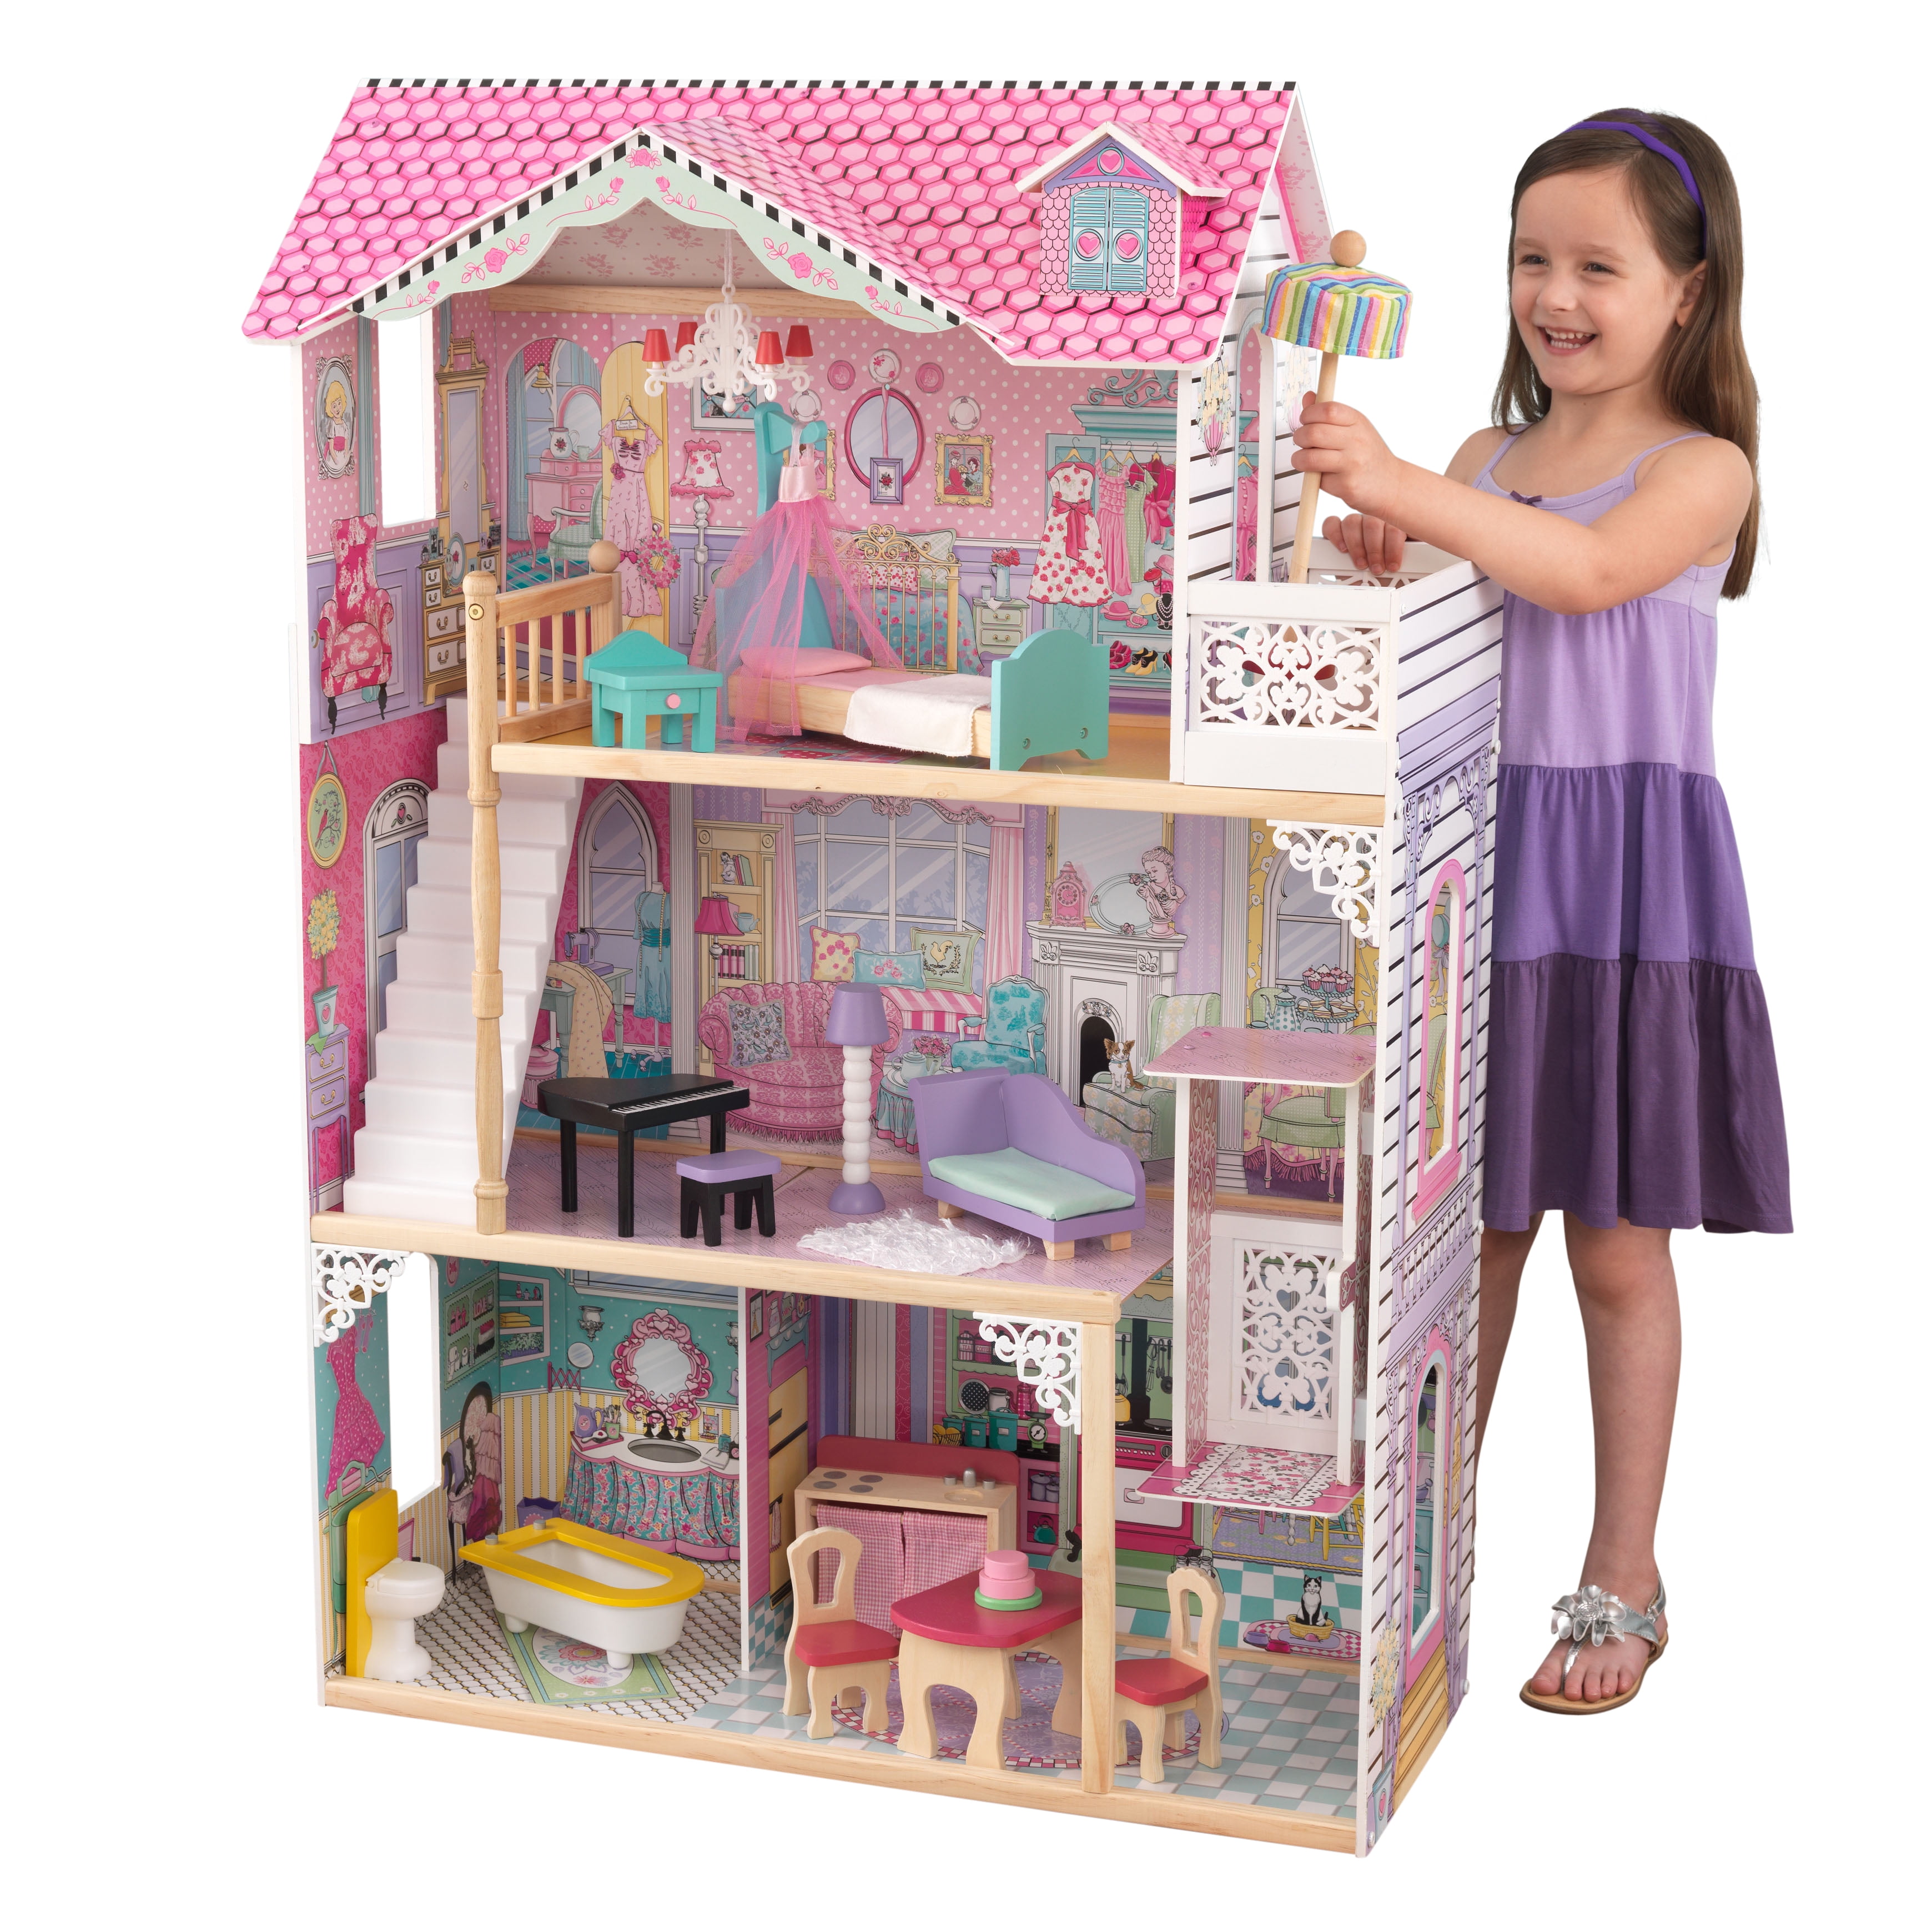 KidKraft Annabelle Large Wooden Play Dollhouse w/ 17 Furniture Accessories Pink 